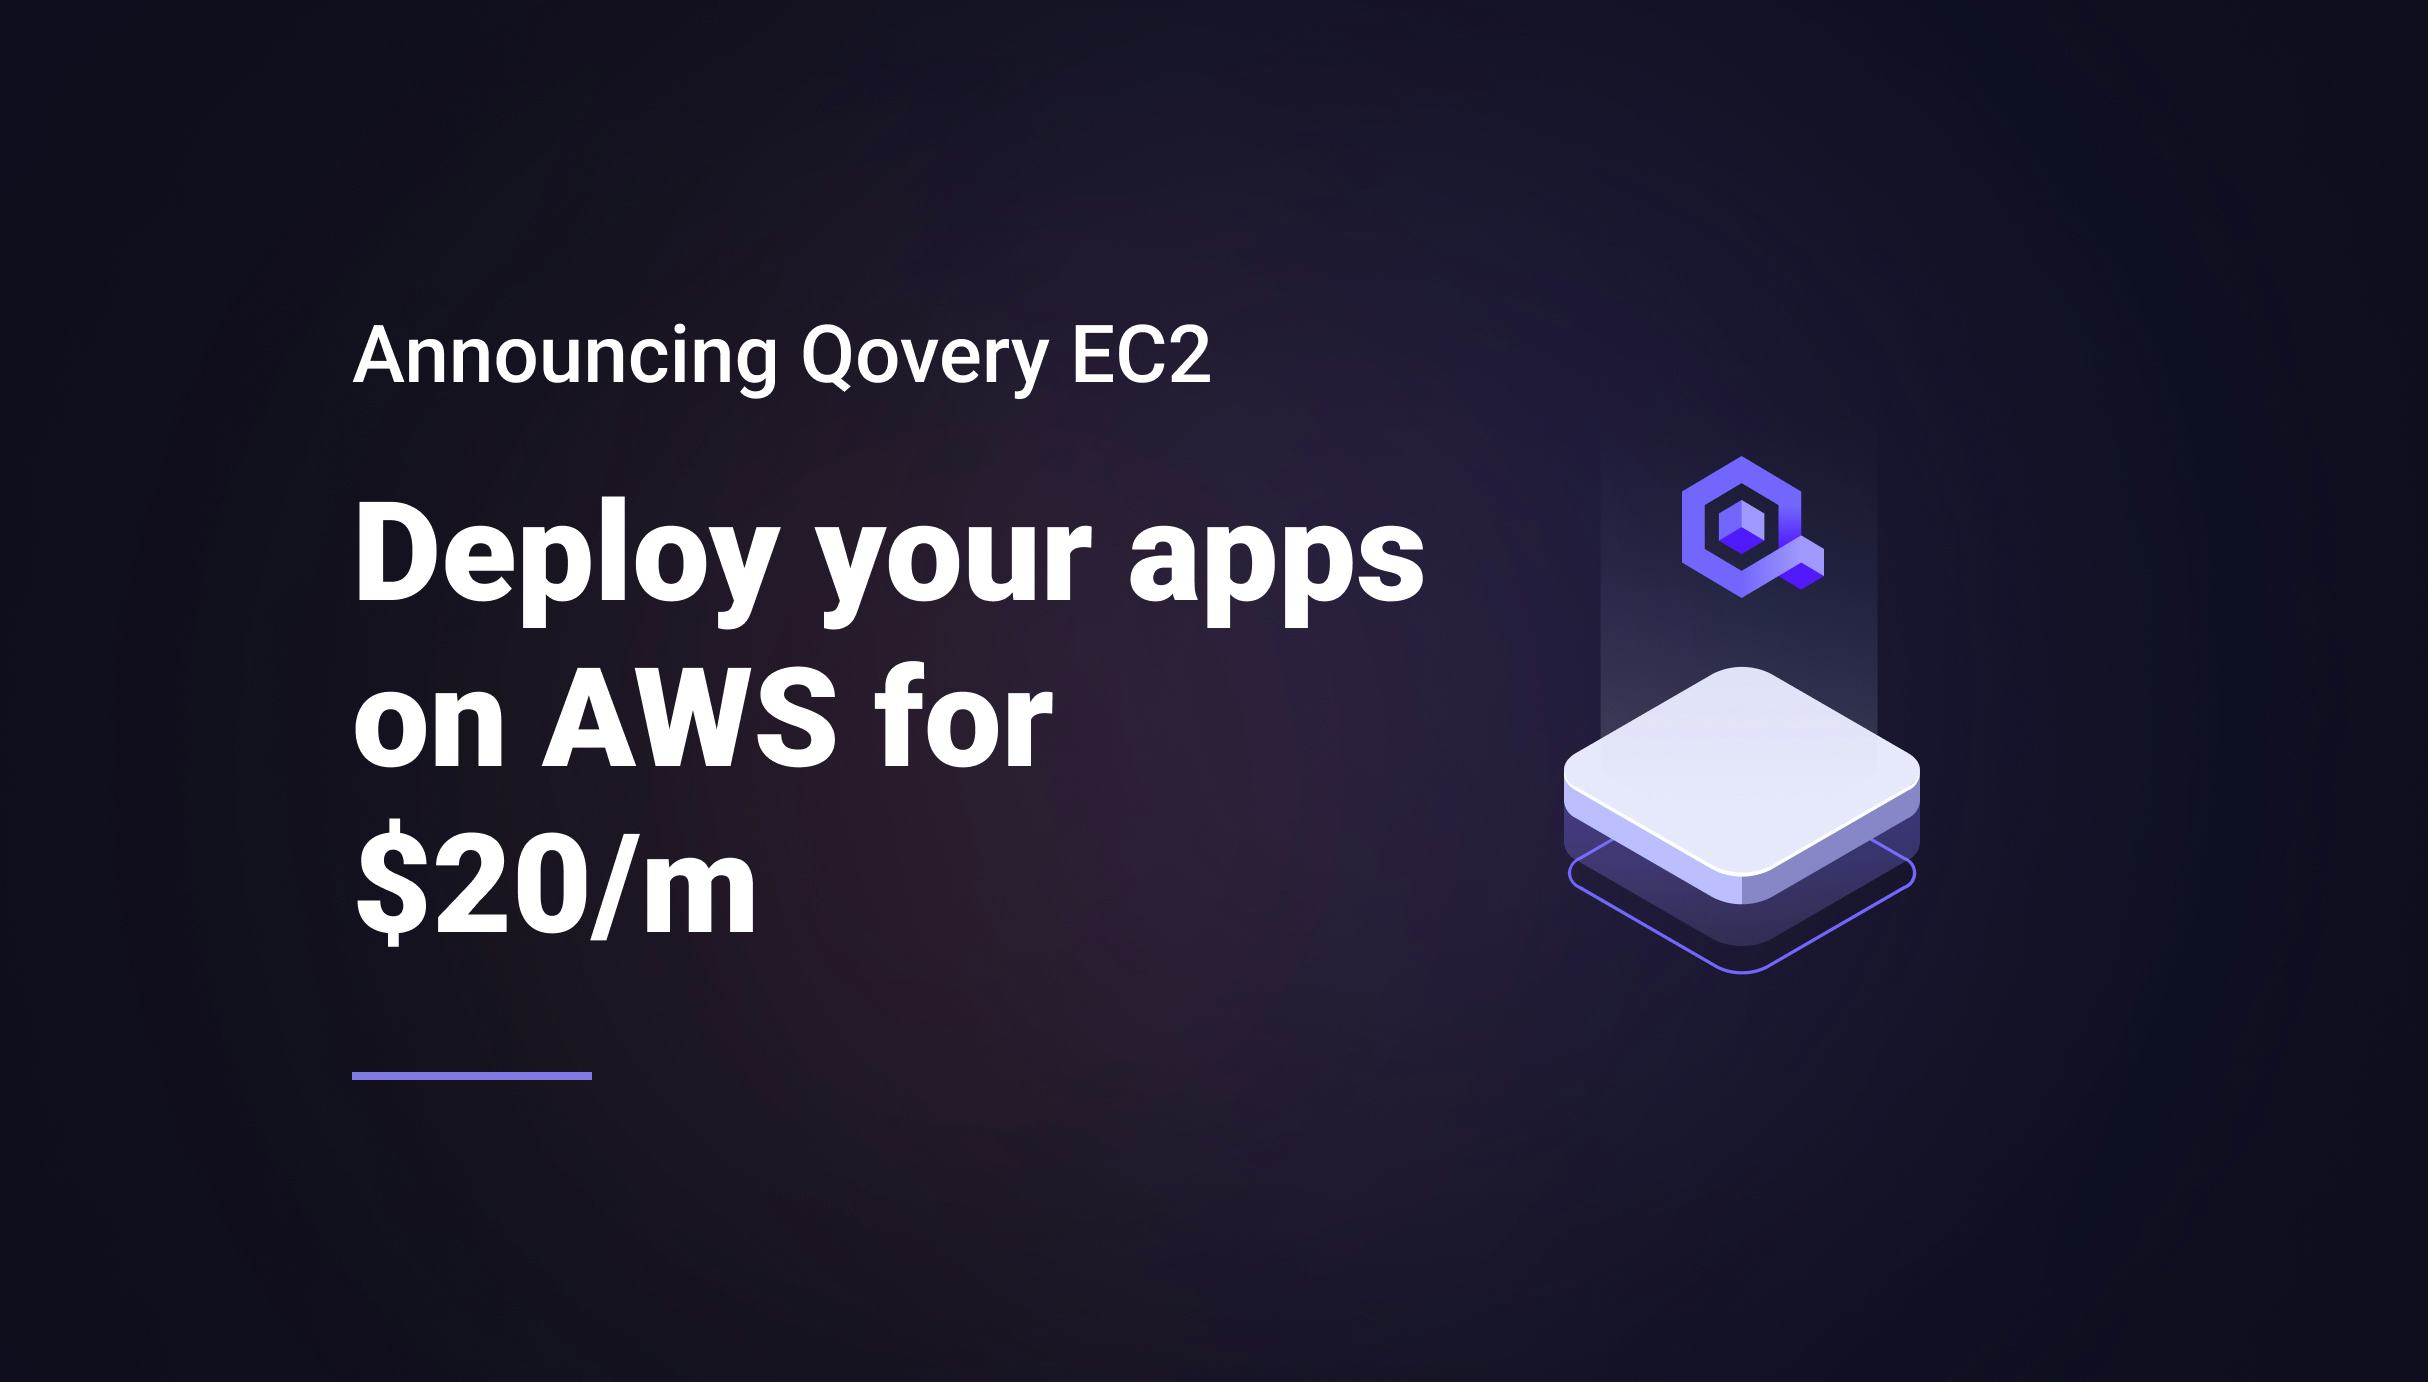 Announcing Qovery EC2: Deploy your apps on AWS for $20/m - Qovery